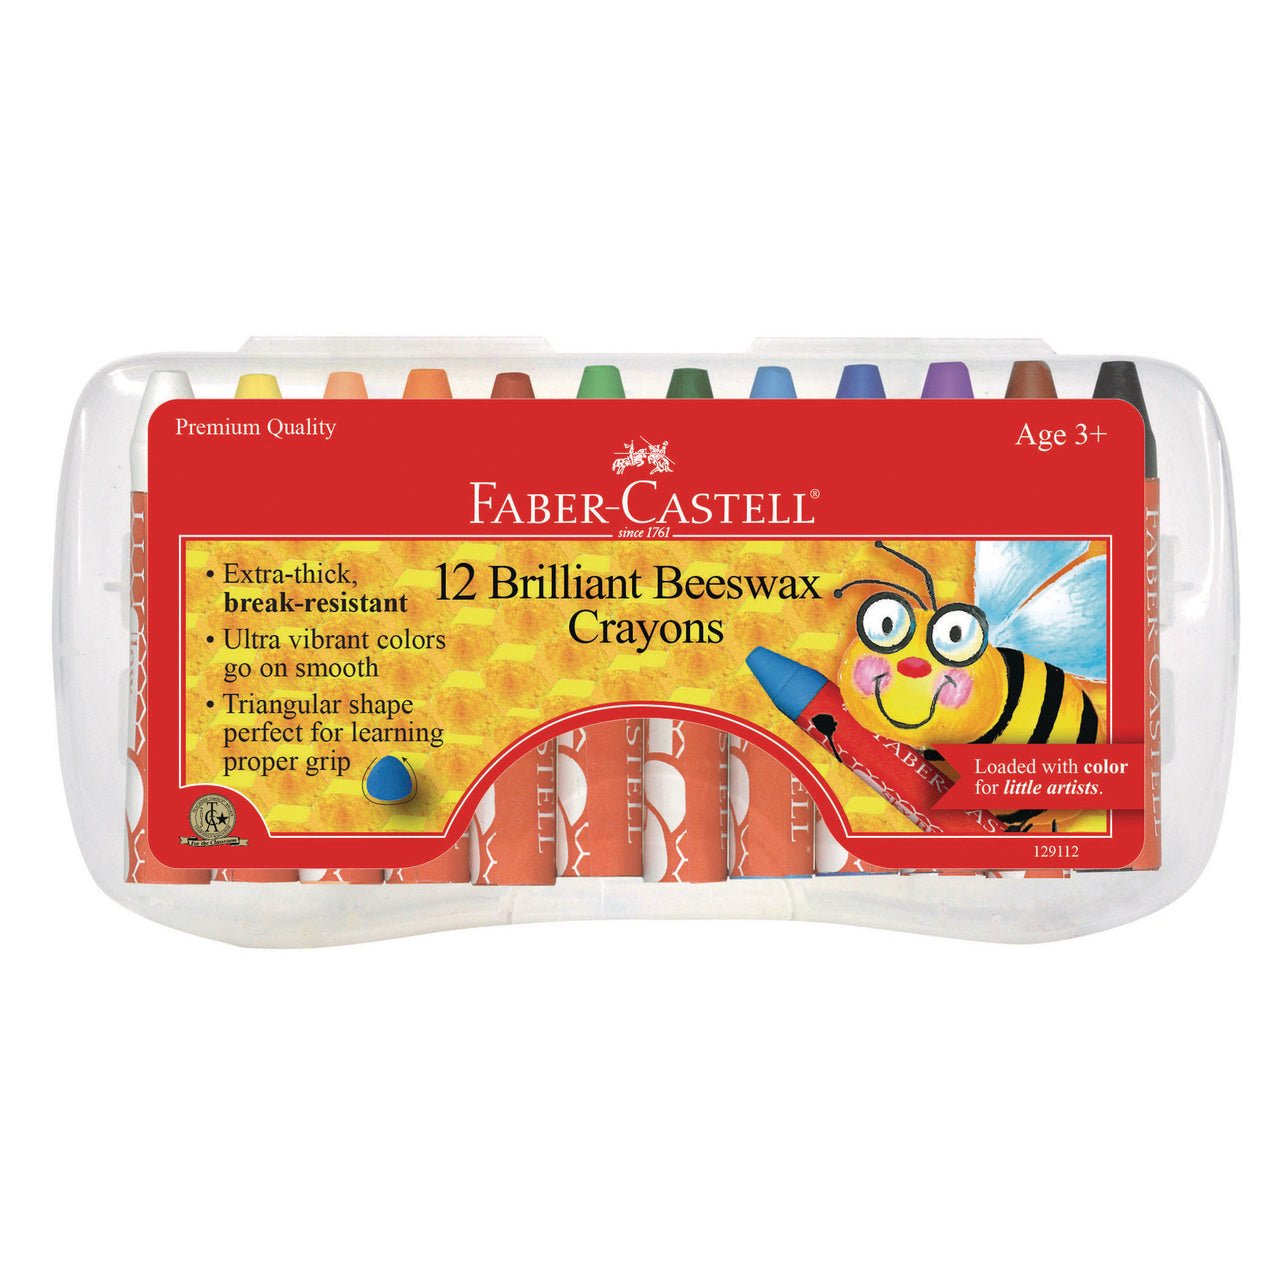 Faber-Castell Brilliant Beeswax Crayons Set of 12 - merriartist.com